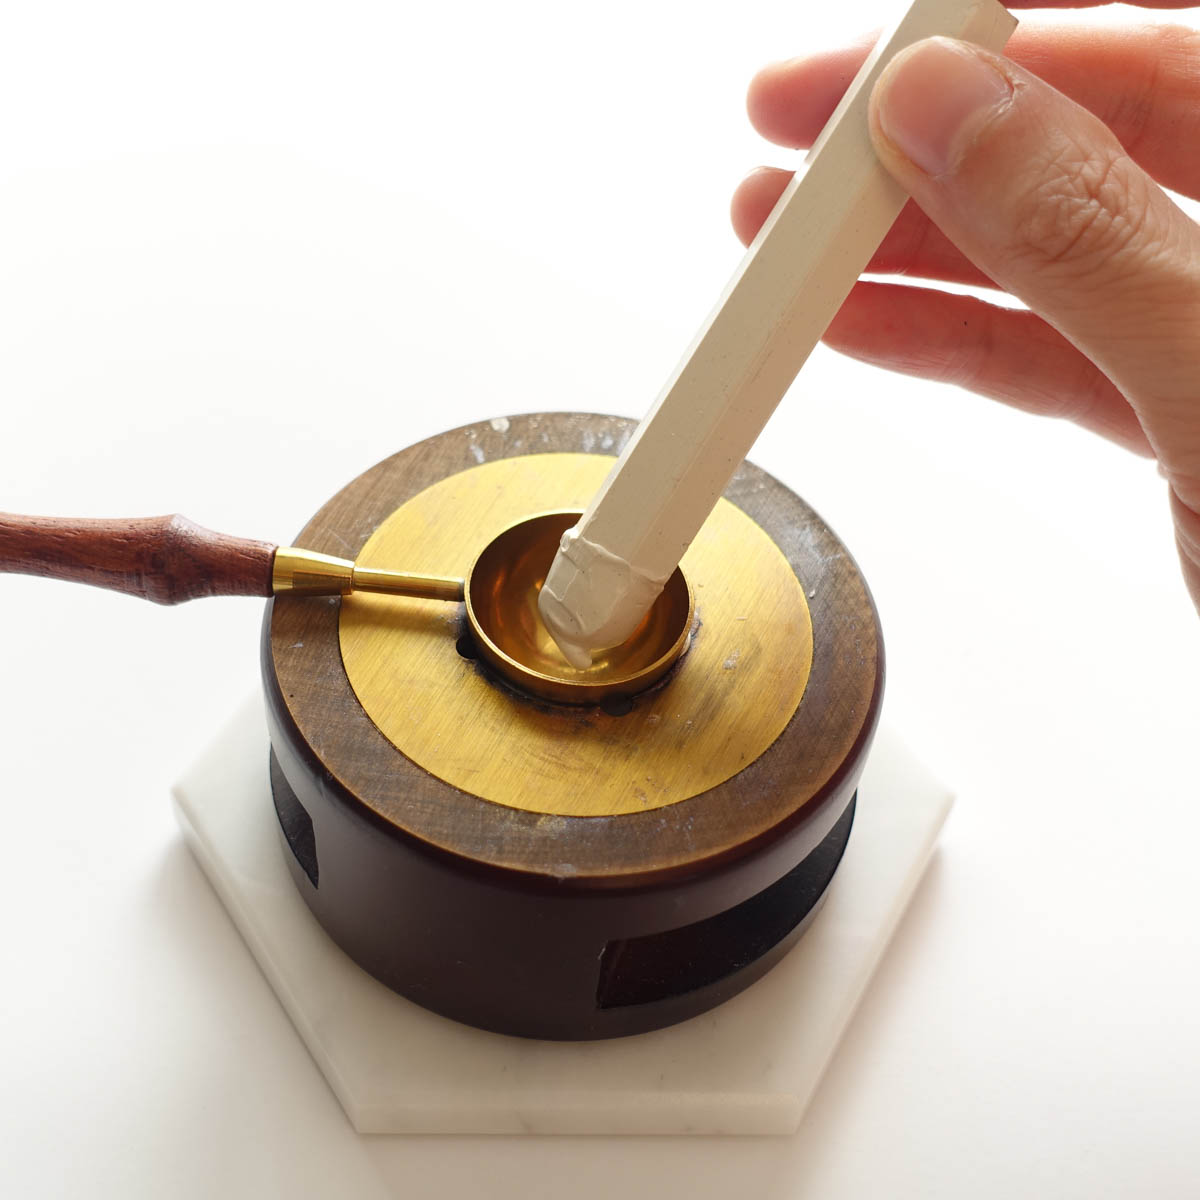 How to melt wax seal stick with spoon and stove holder